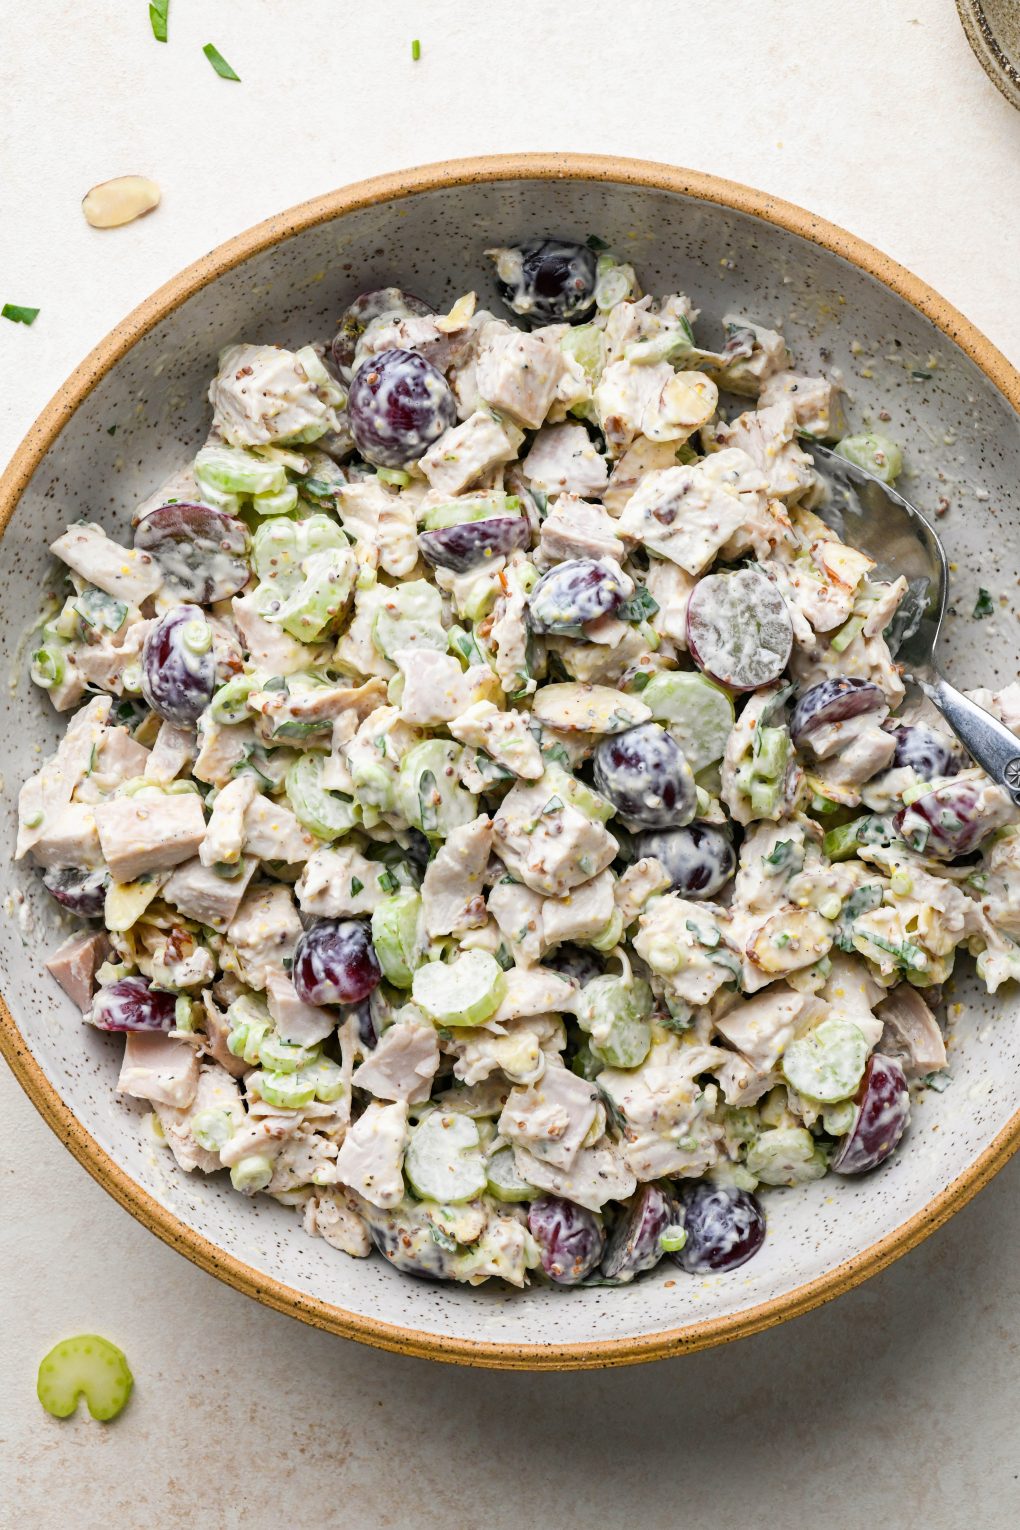 How to make easy chicken salad with grapes: ingredients for chicken salad with grapes in a large ceramic speckled bowl after mixing